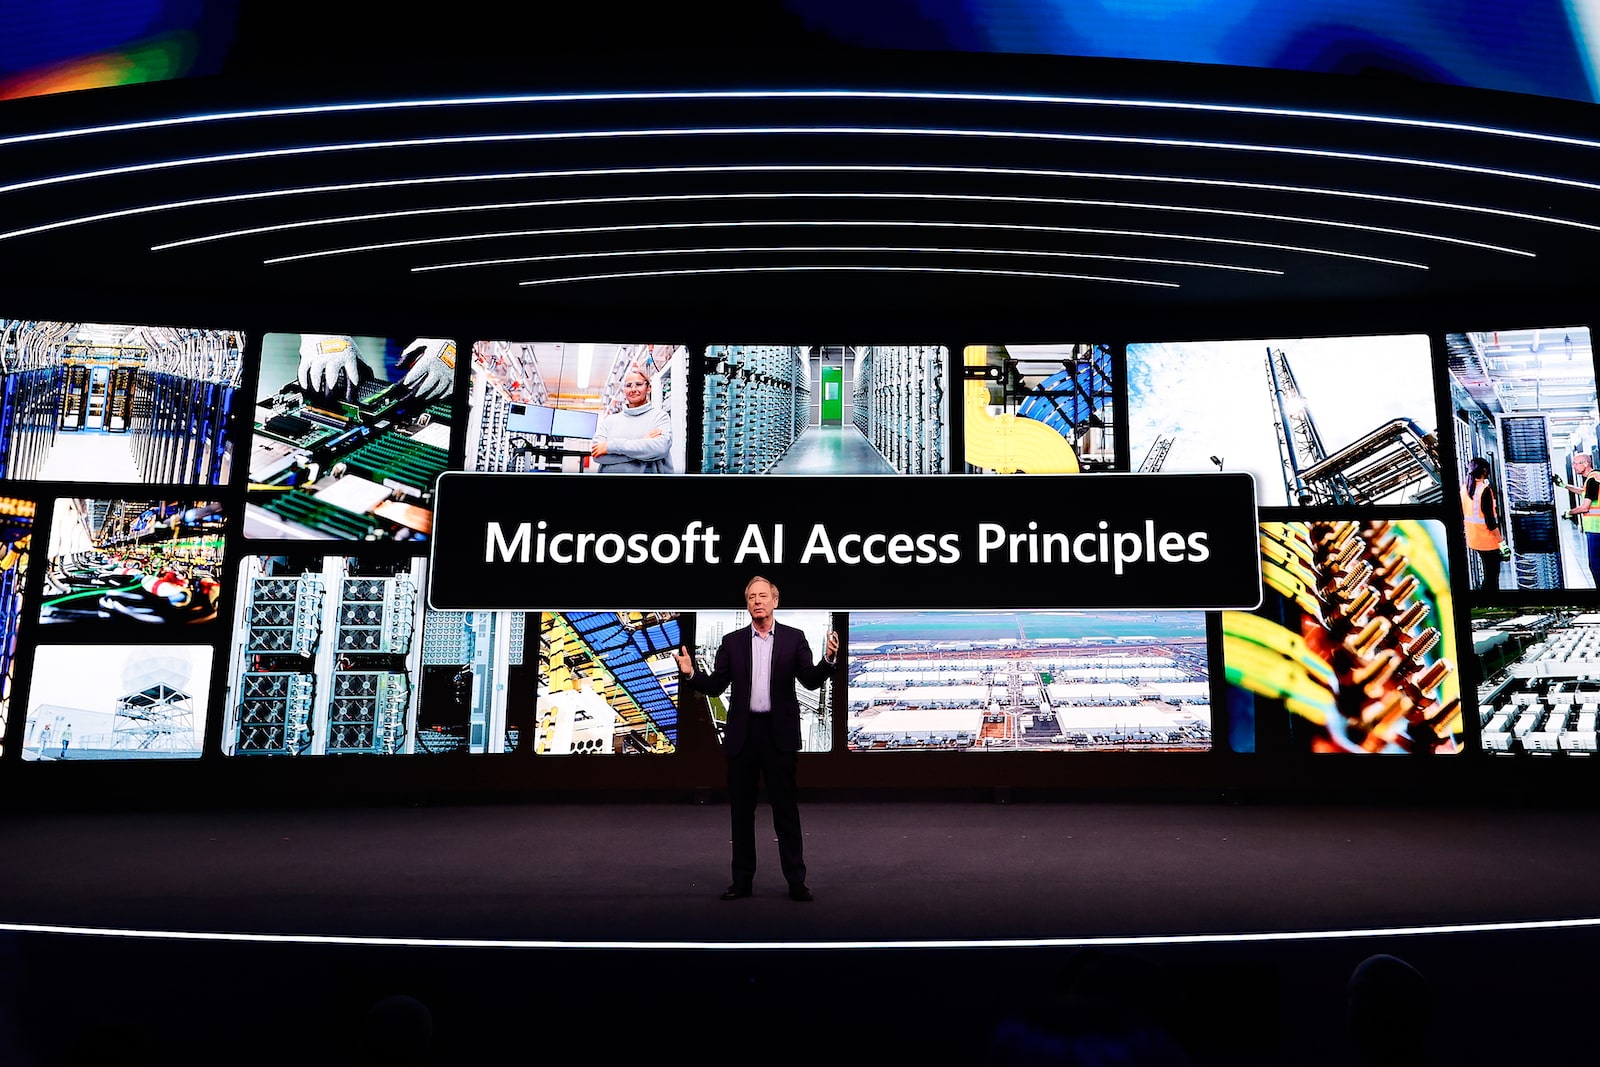 A man in a suit stands on stage in front of a screen that says Microsoft AI Access Principles with lots of small industry photos in the background